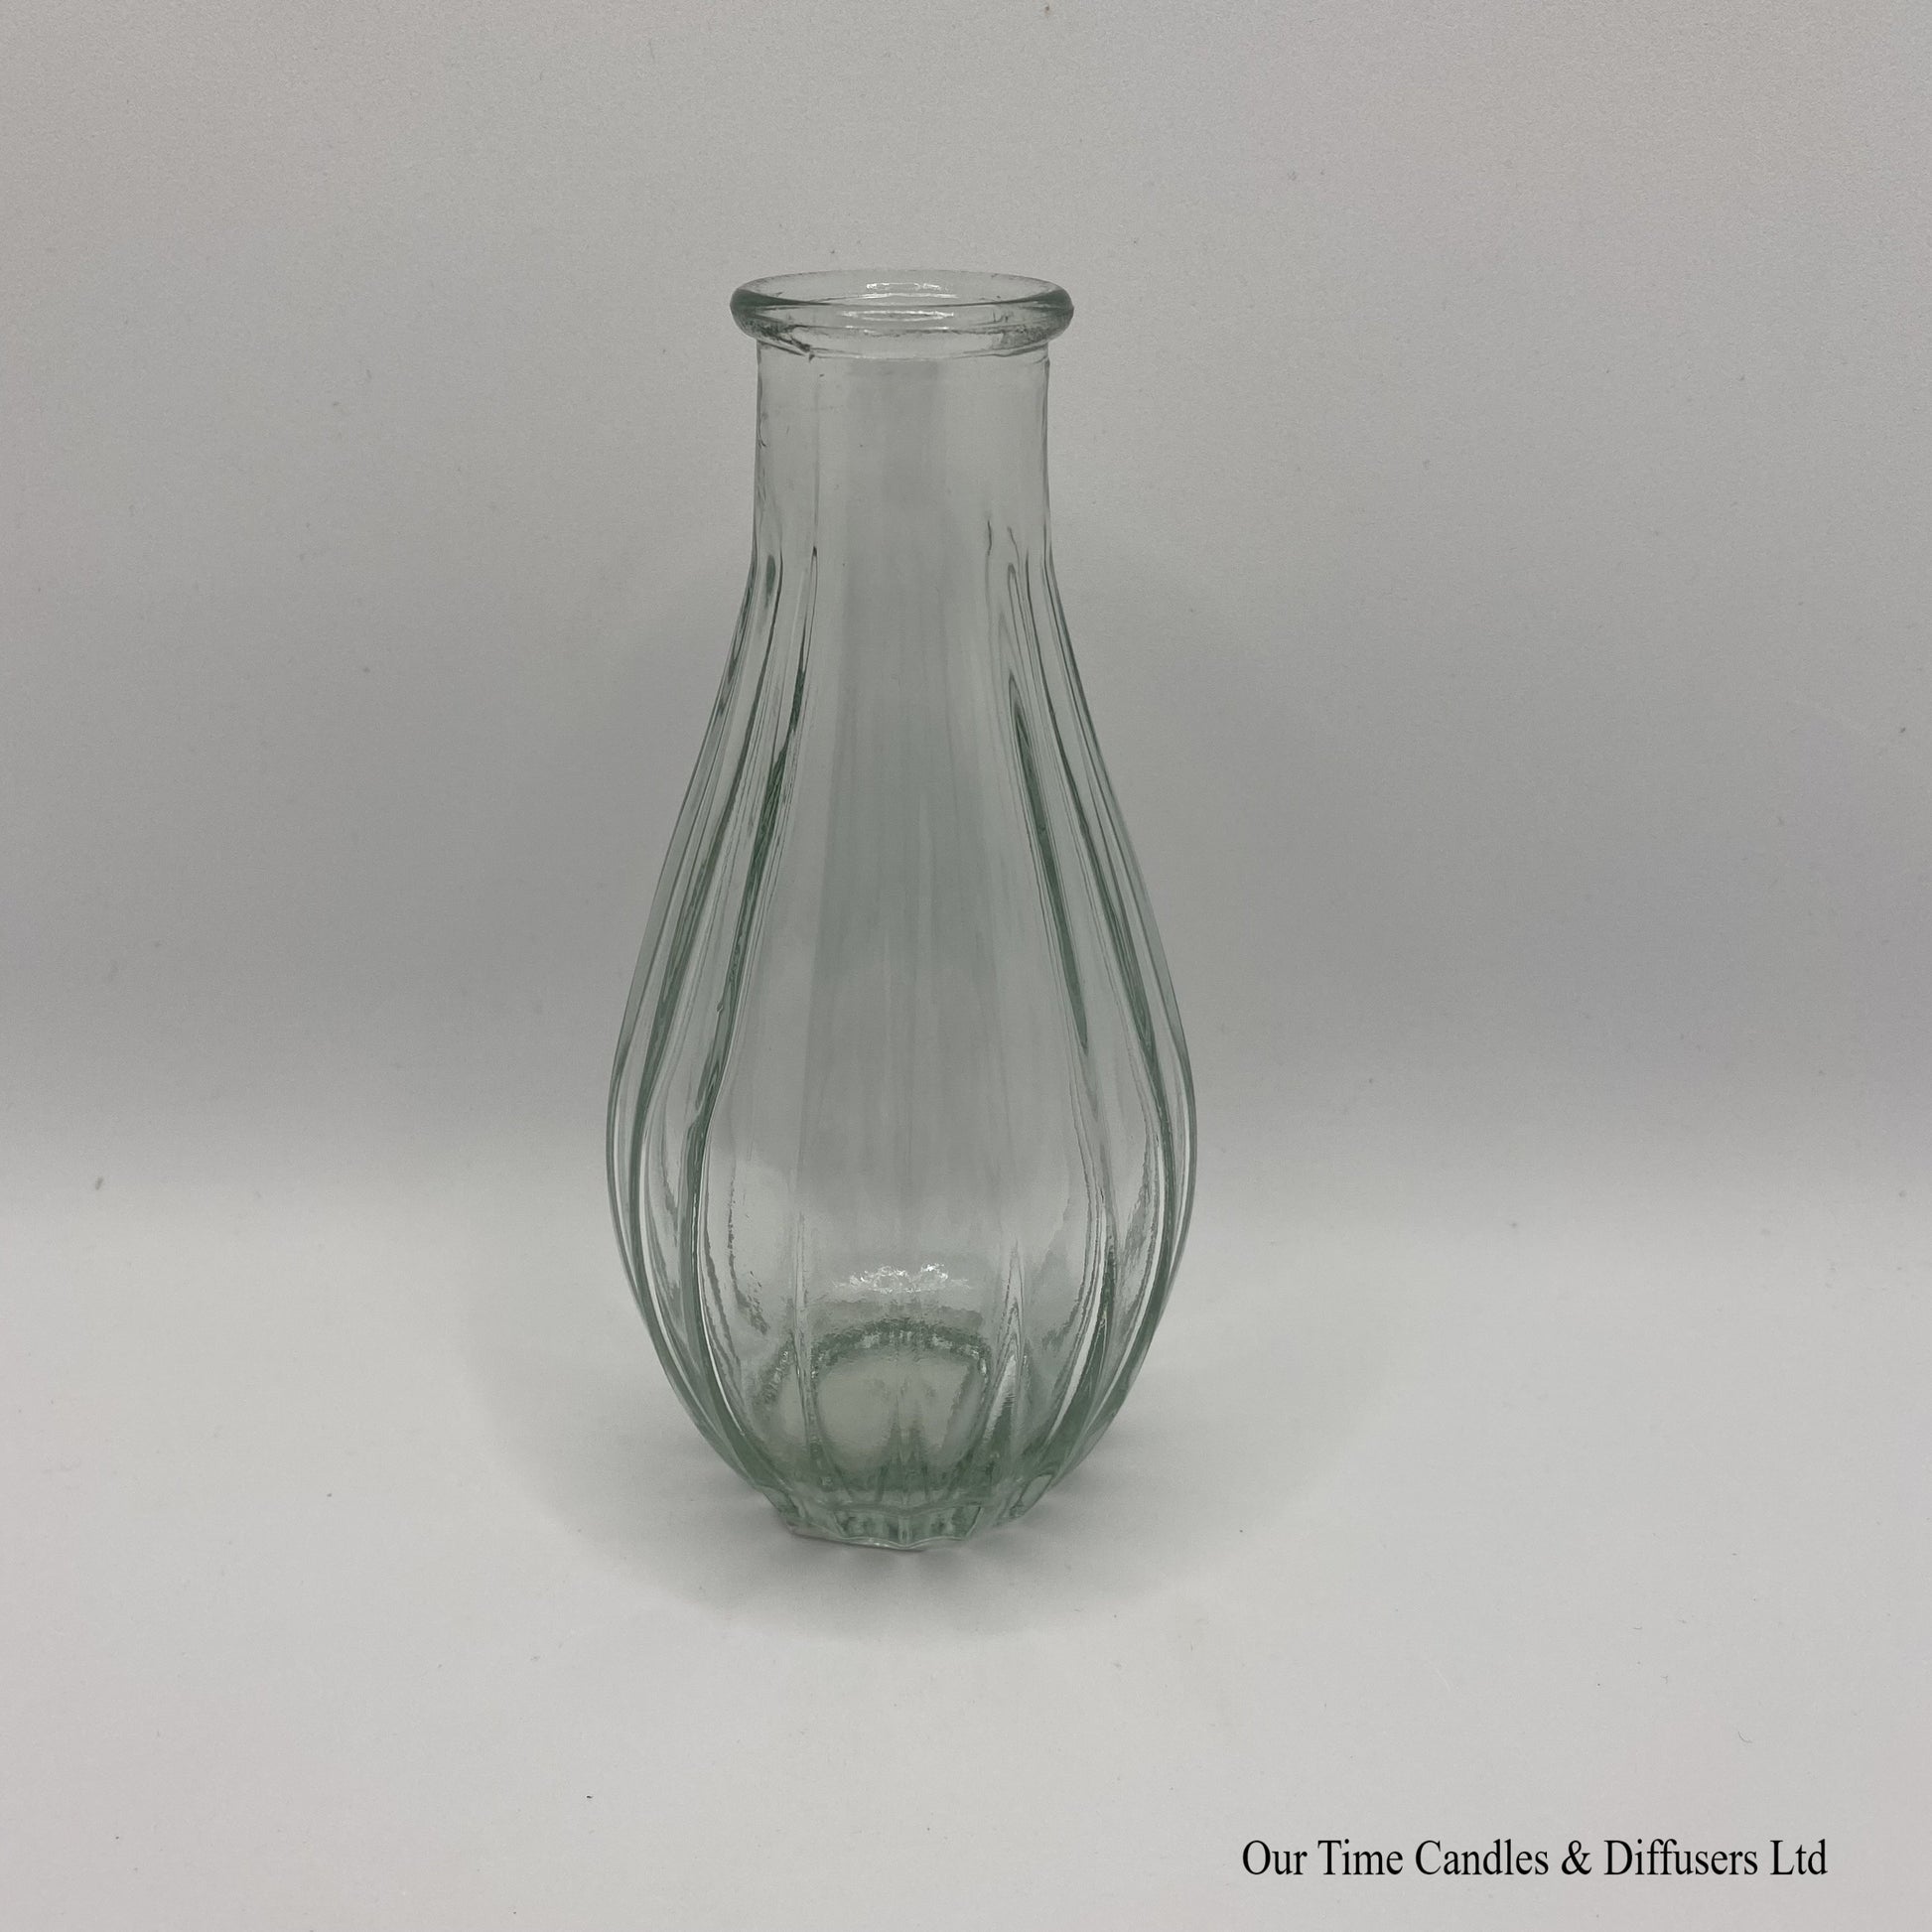 Fluted diffuser vase in clear